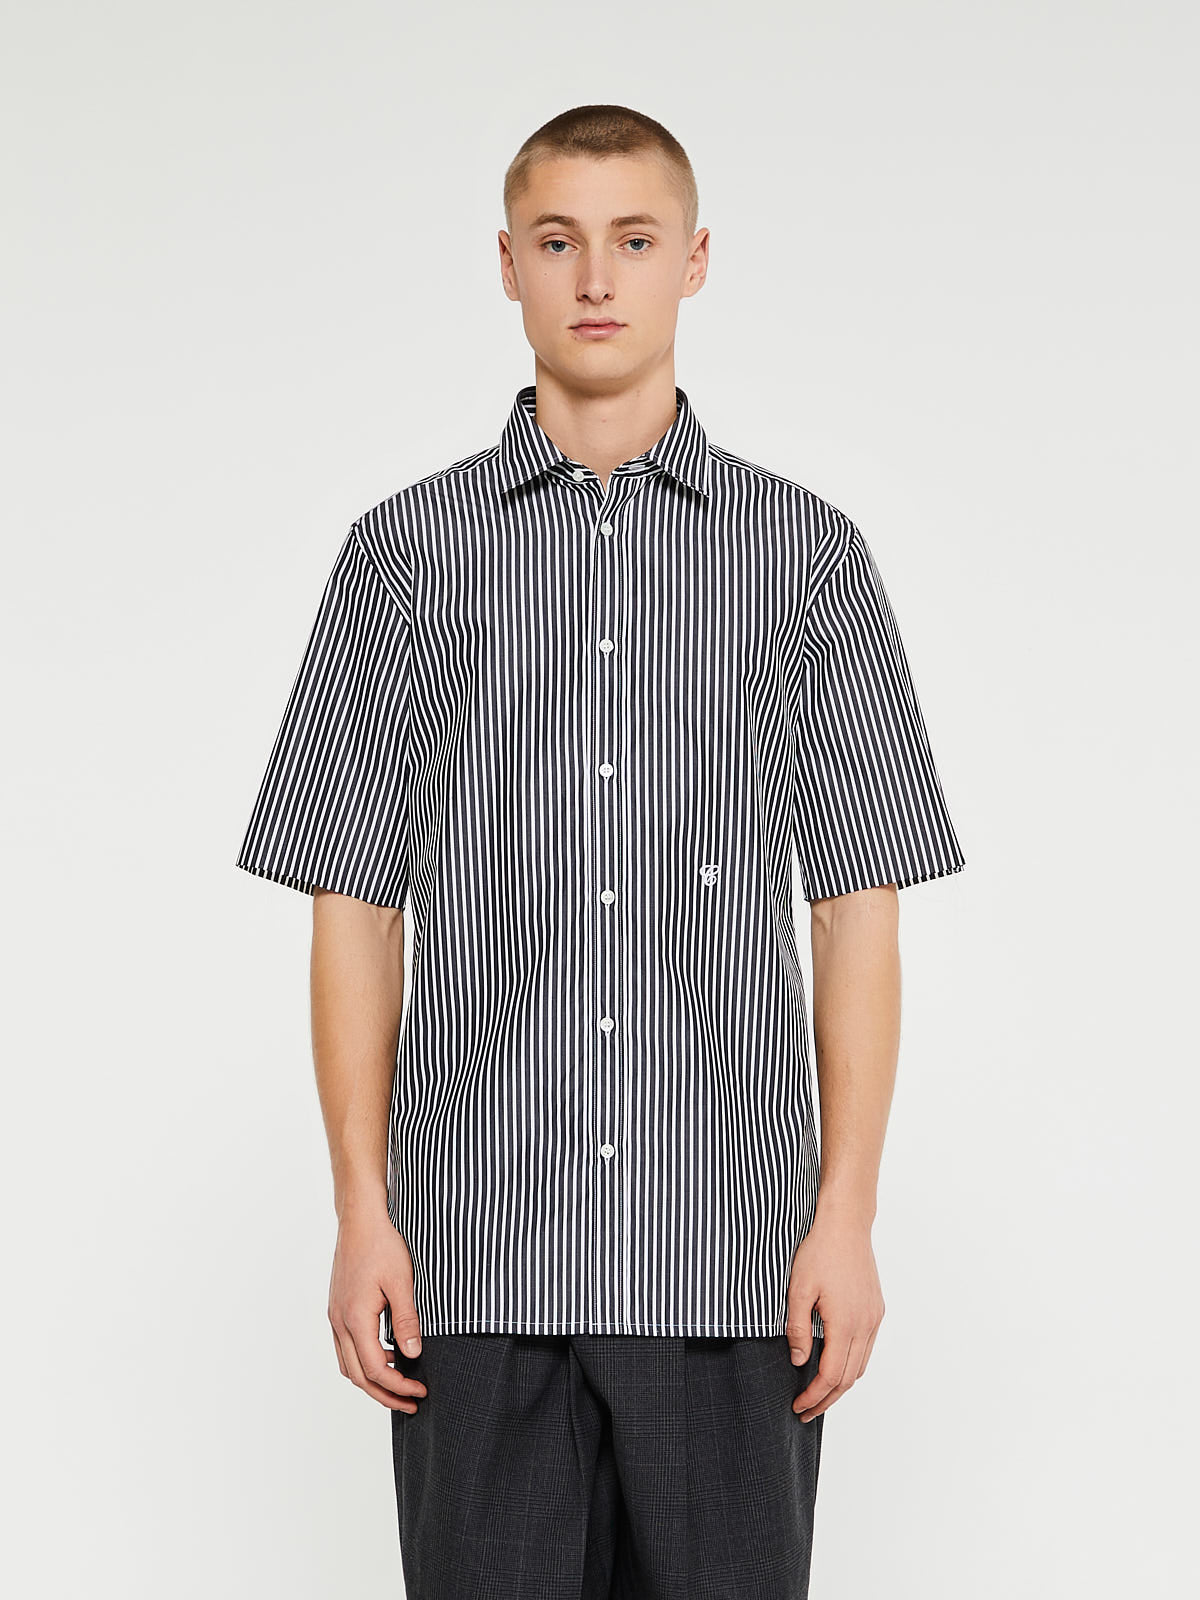 C Striped Shirt in Black and White